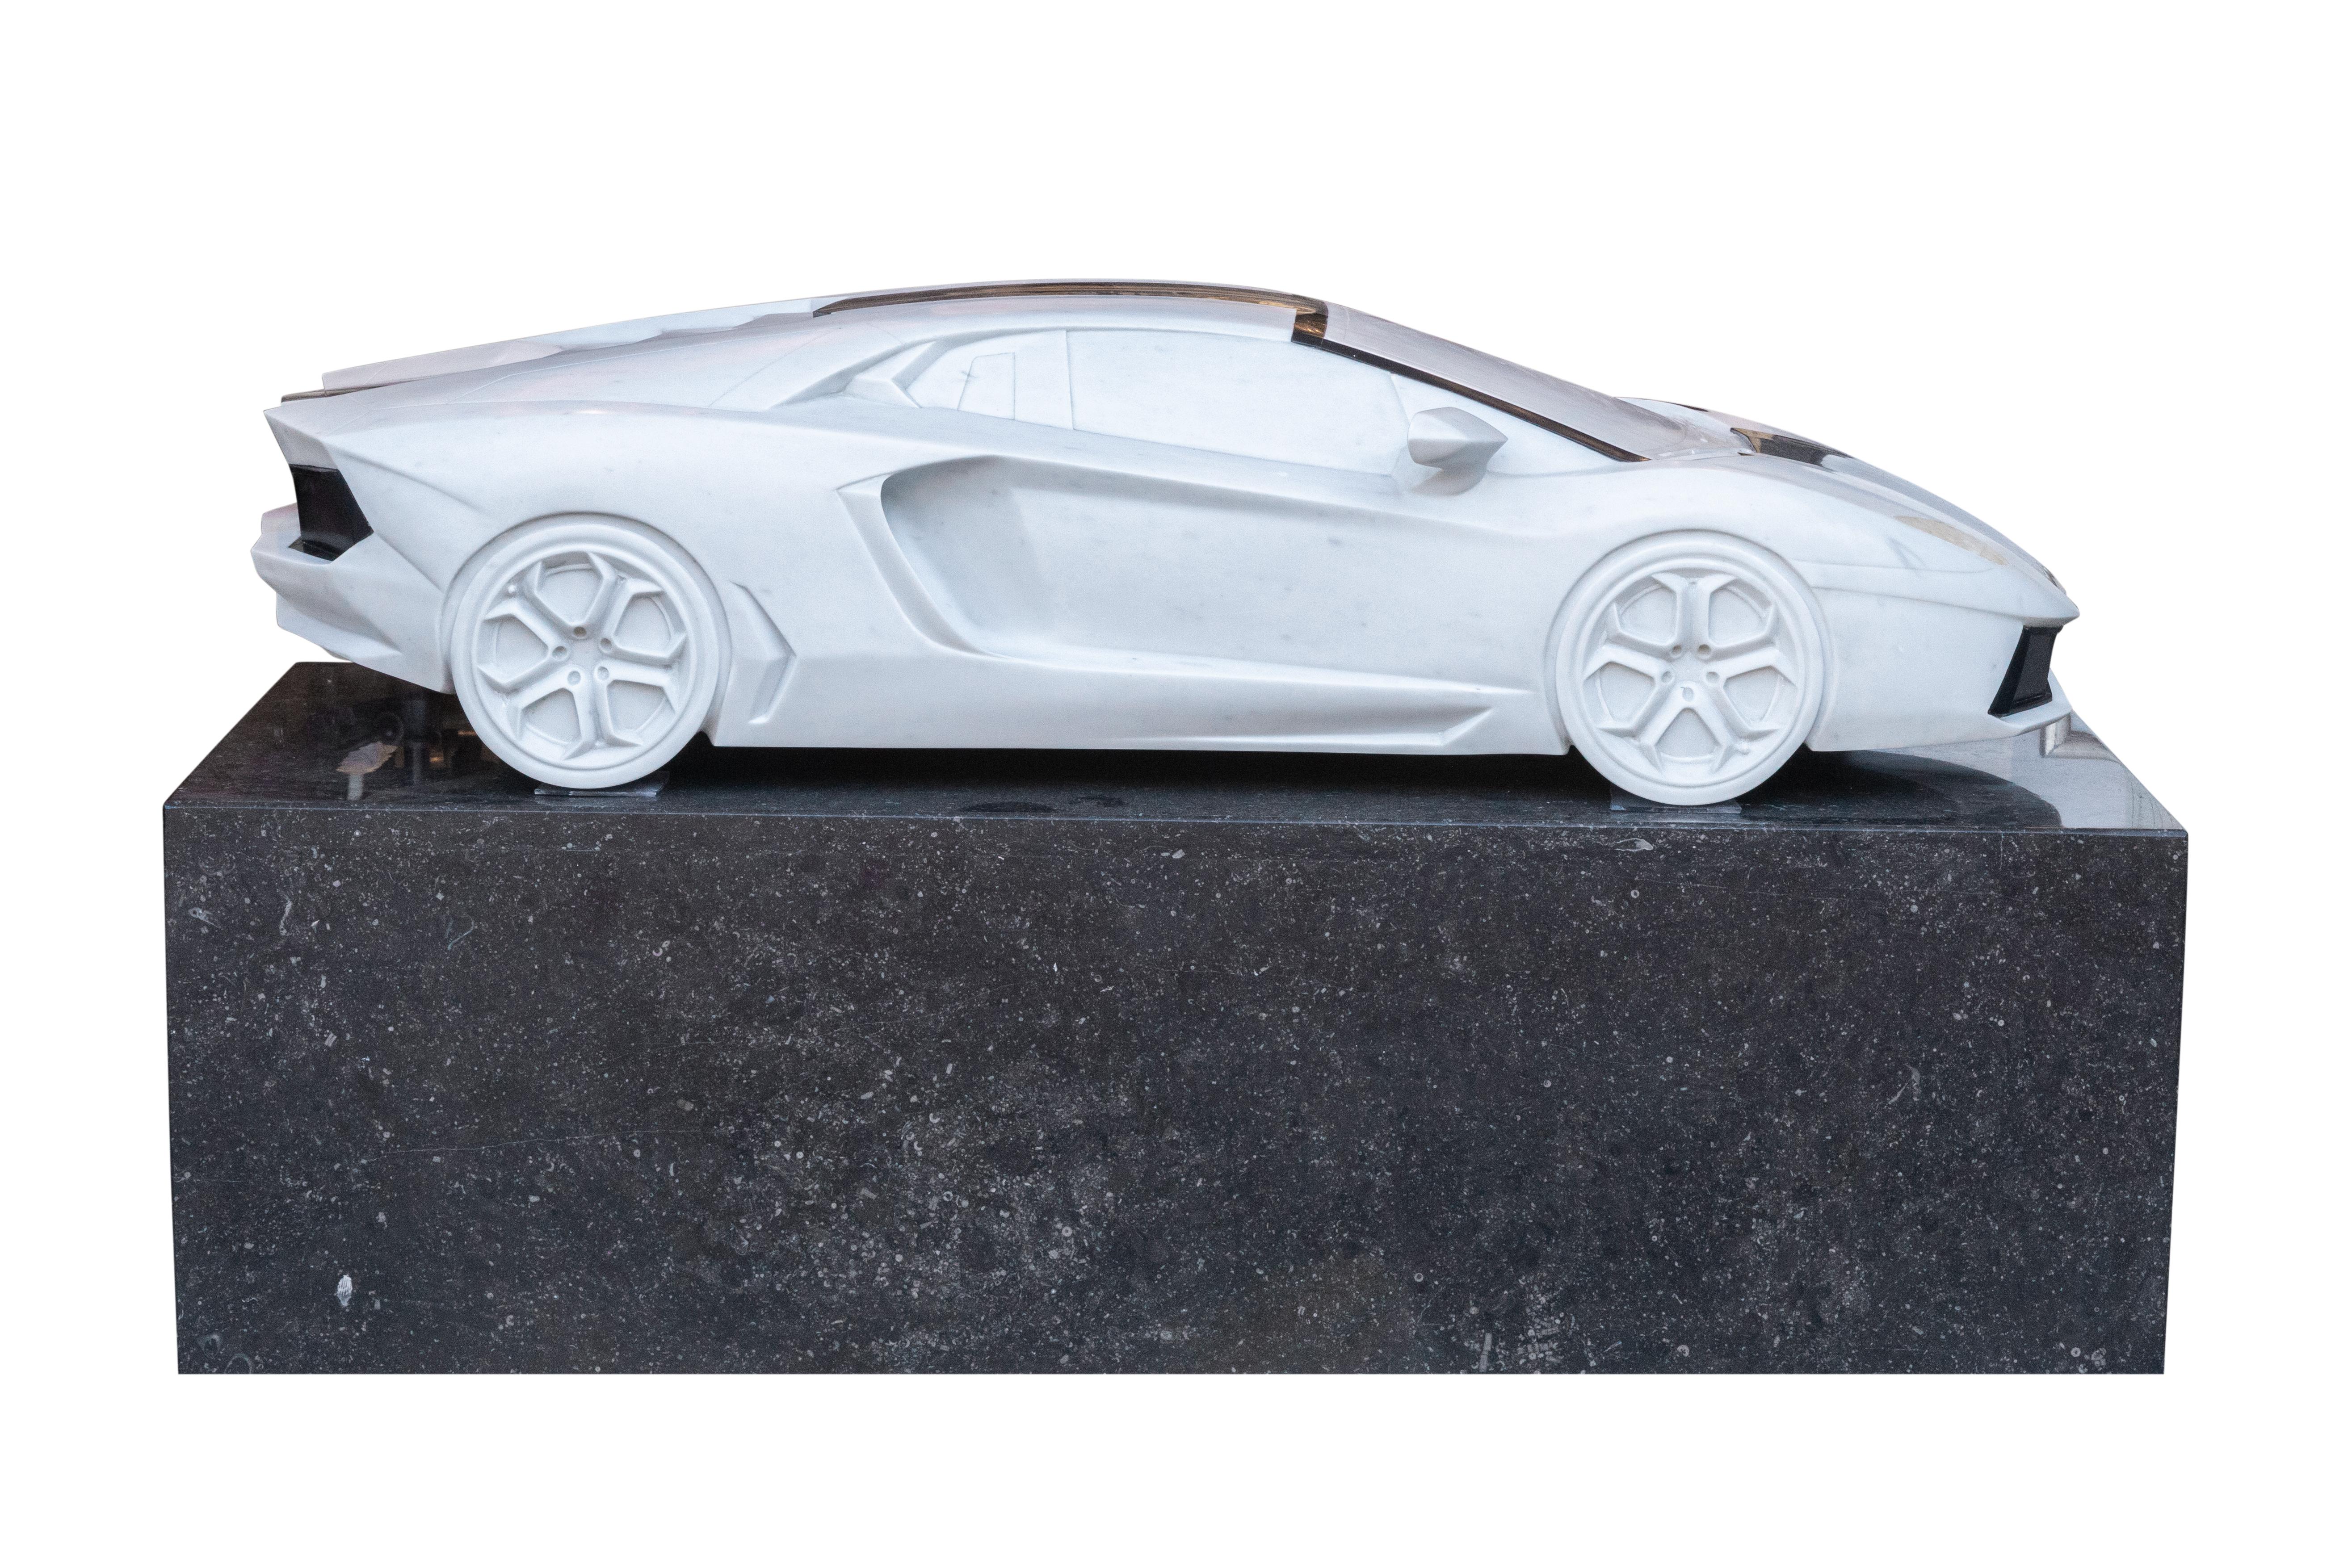 This sculpture in fine white P marble, black Belgian marble and rock crystal is a tribute to the famous car manufacturer Lamborghini, specifically the Aventador LP700-4.

The Lamborghini Aventador is a mid-engine sportscar produced by the Italian